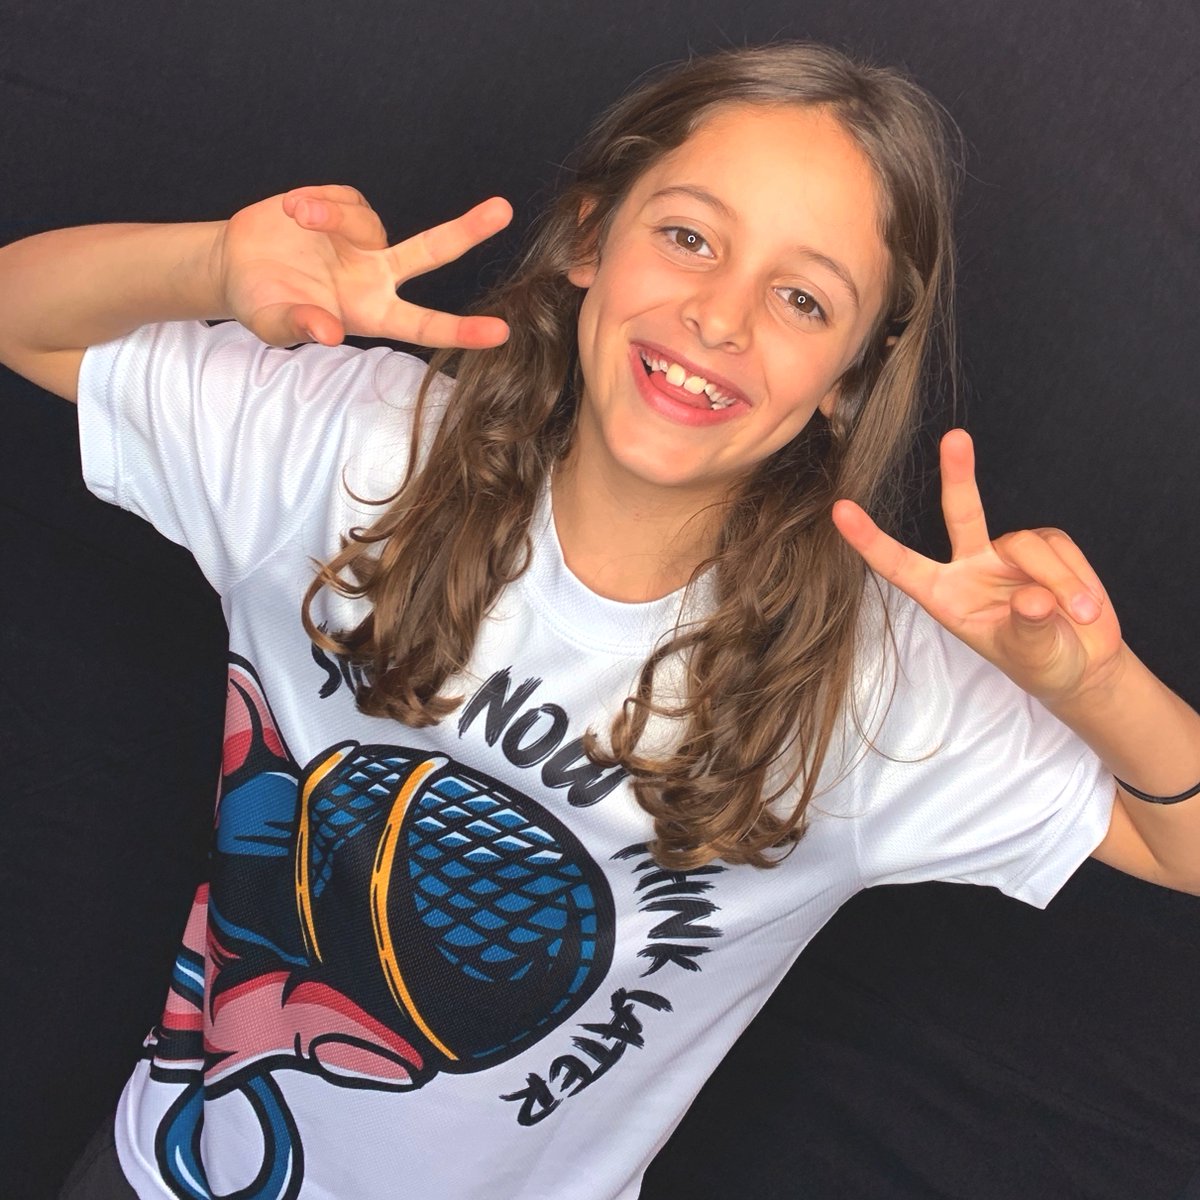 Our beautiful student Olivia rocking our Sing Now, Think Later apparel!

#artistdevelopment #vocaltraining #vocalcoach #singers #musicians #actors #instagood #summer #singinglessons #quote #inspiration #musictheorylessons #lessons #voice